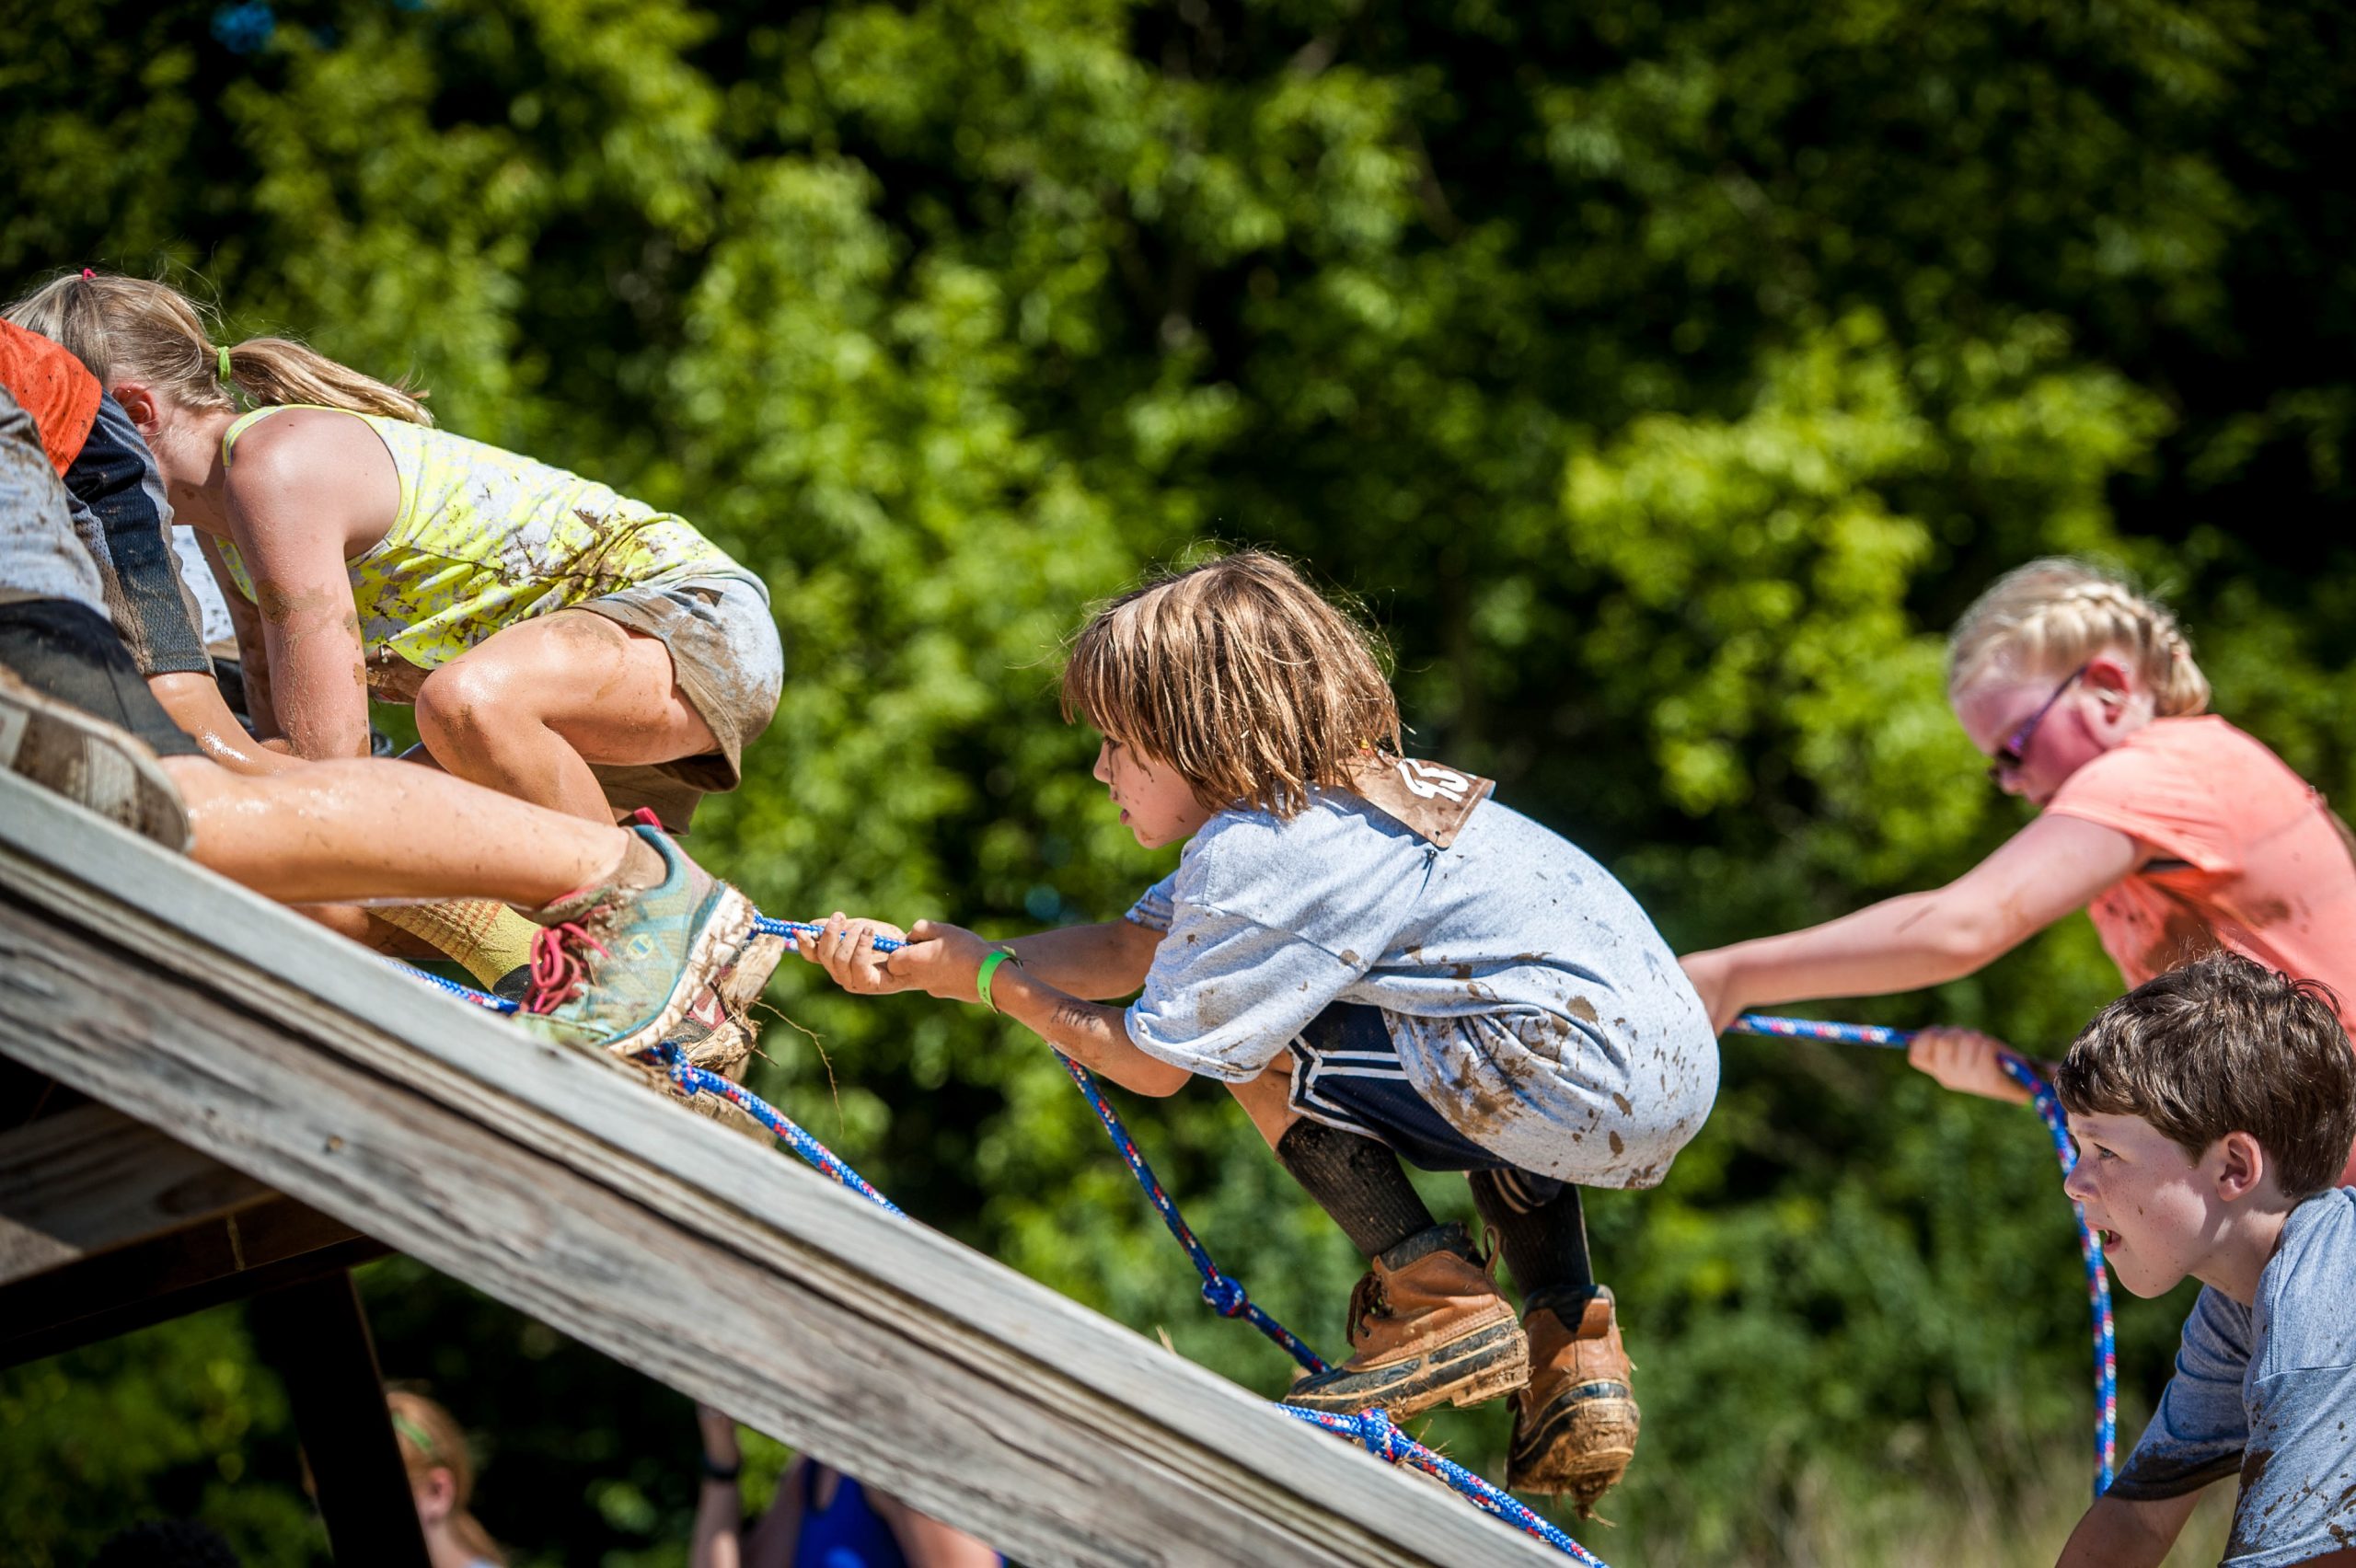 Splat: Kids climbing with ropes.